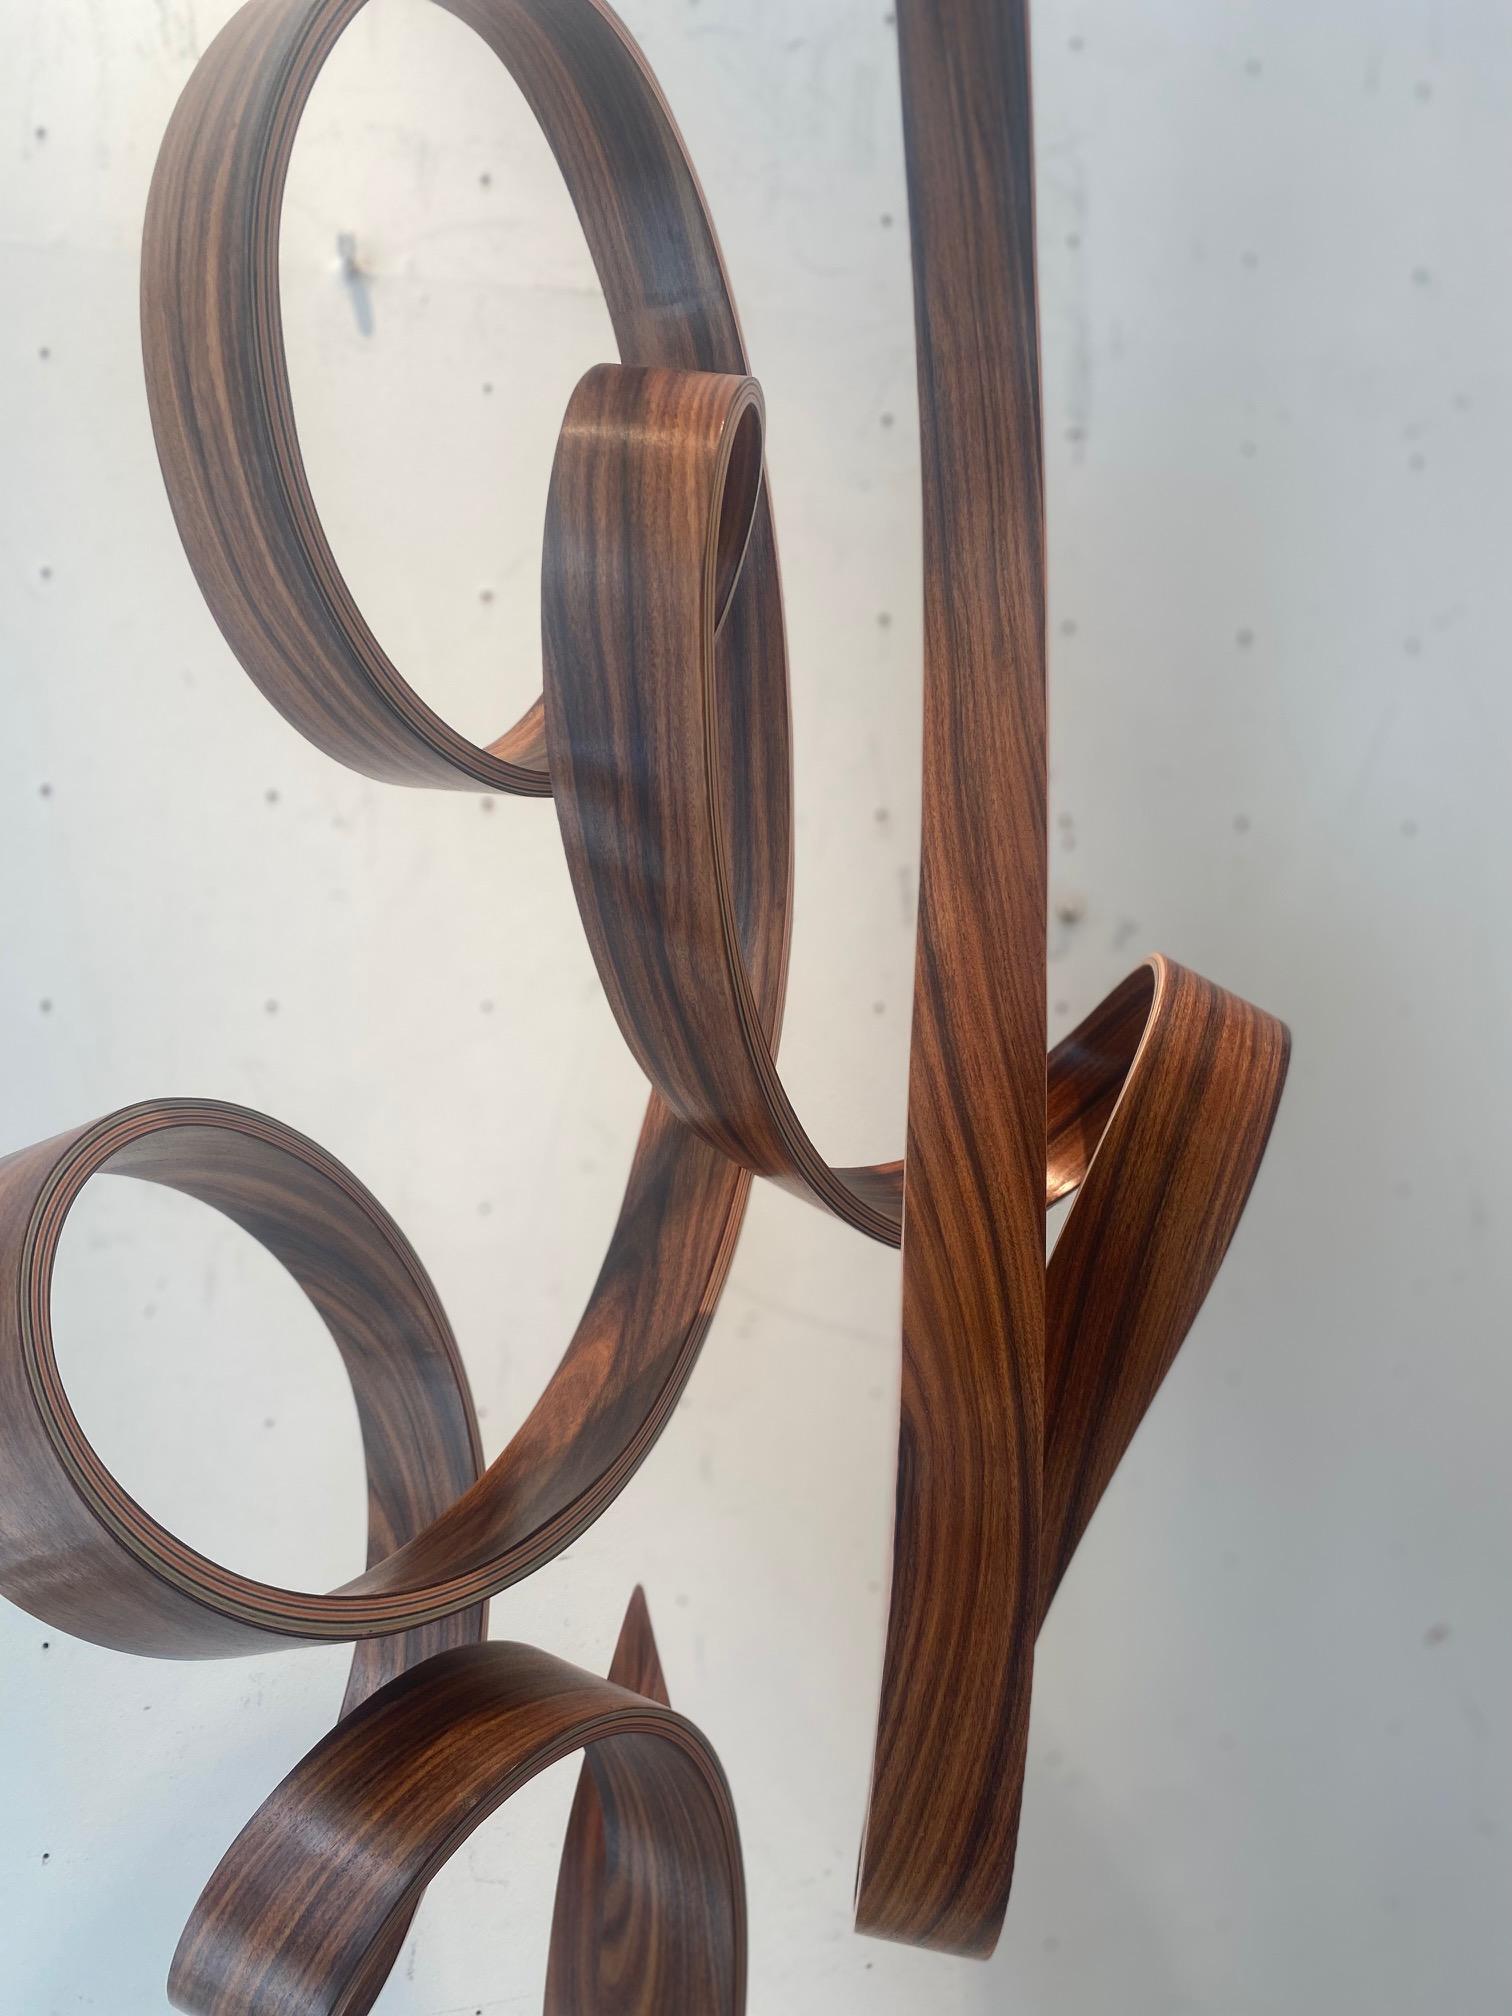 MWT-curvilinear minimalist maple wood sculpture defying gravity by Jacinto Moros 6